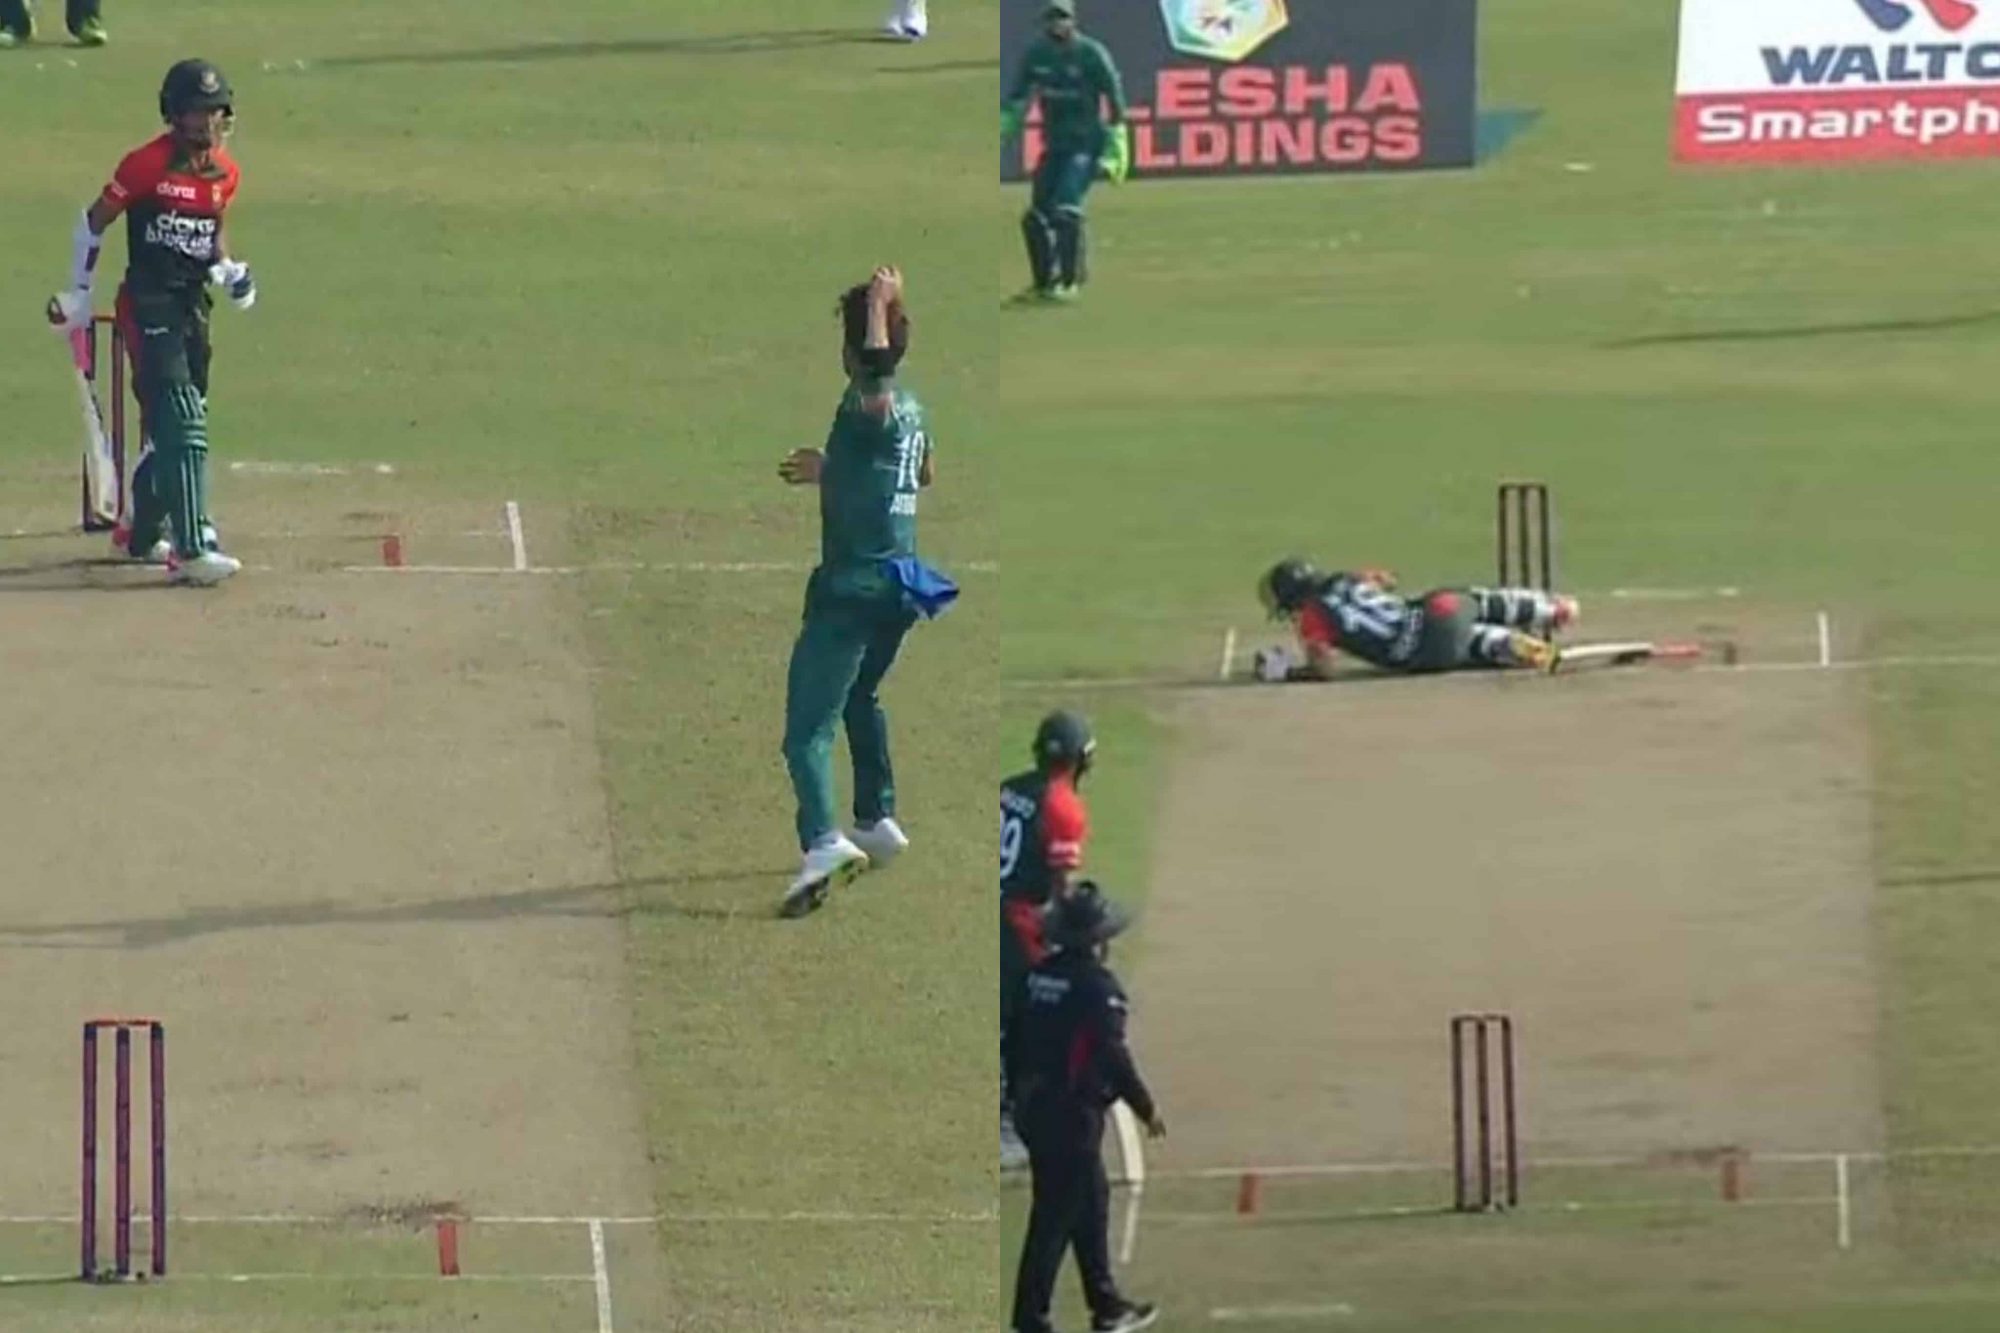 Afridi hit Afif during the second T20I between Pakistan and Bangladesh in Dhaka | Twitter